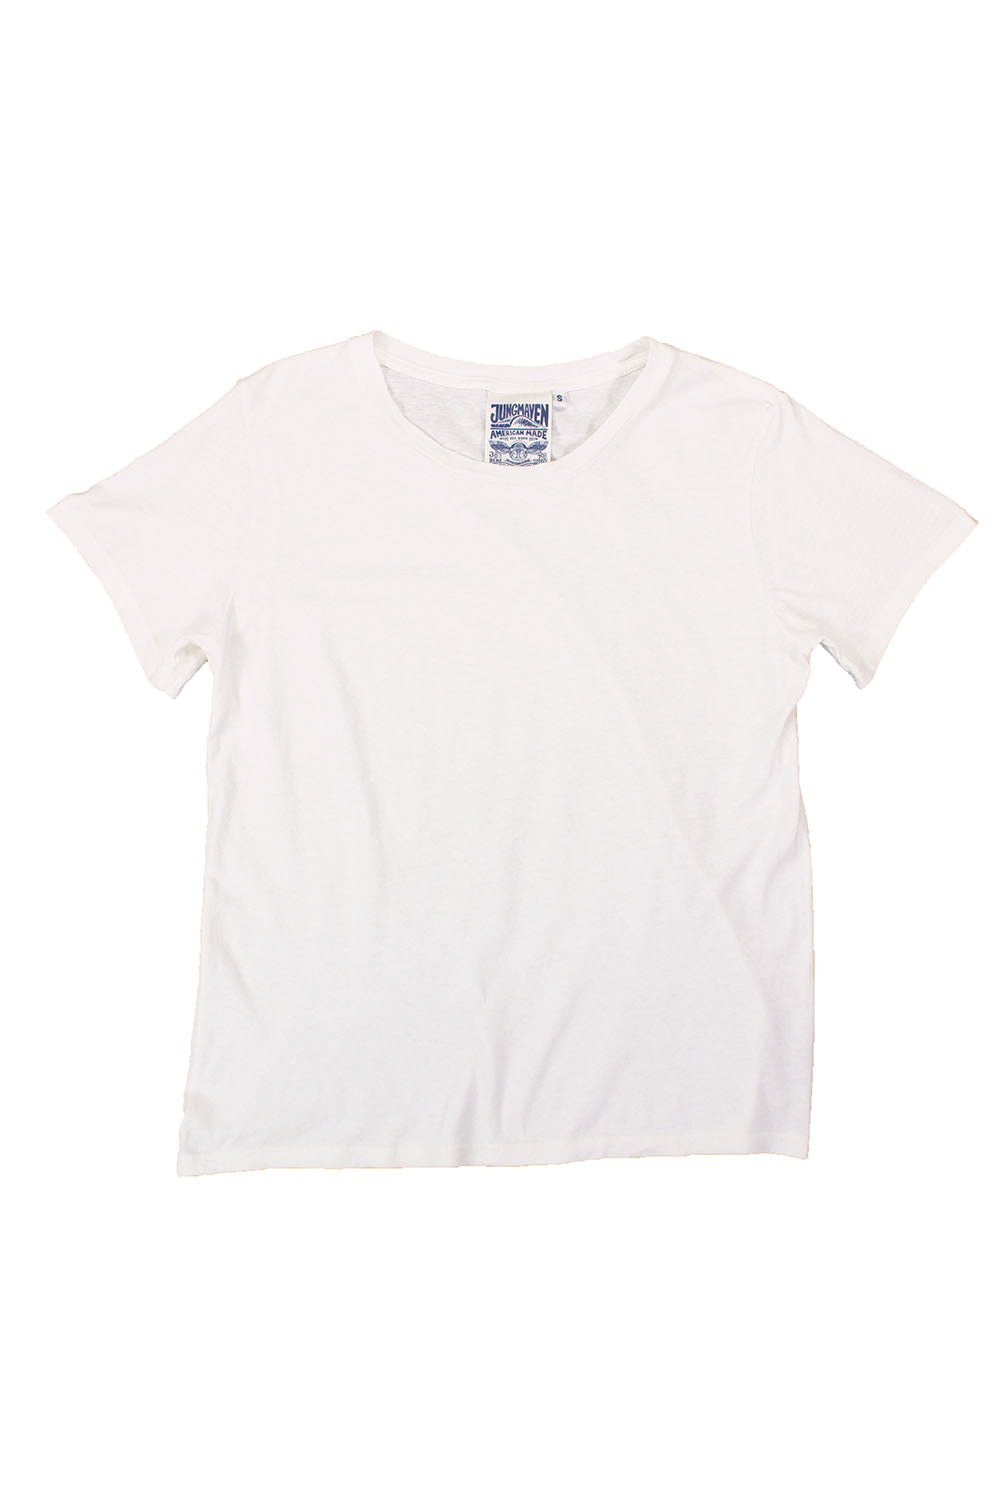 Ojai Tee | Jungmaven Hemp Clothing & Accessories / Color: Washed White